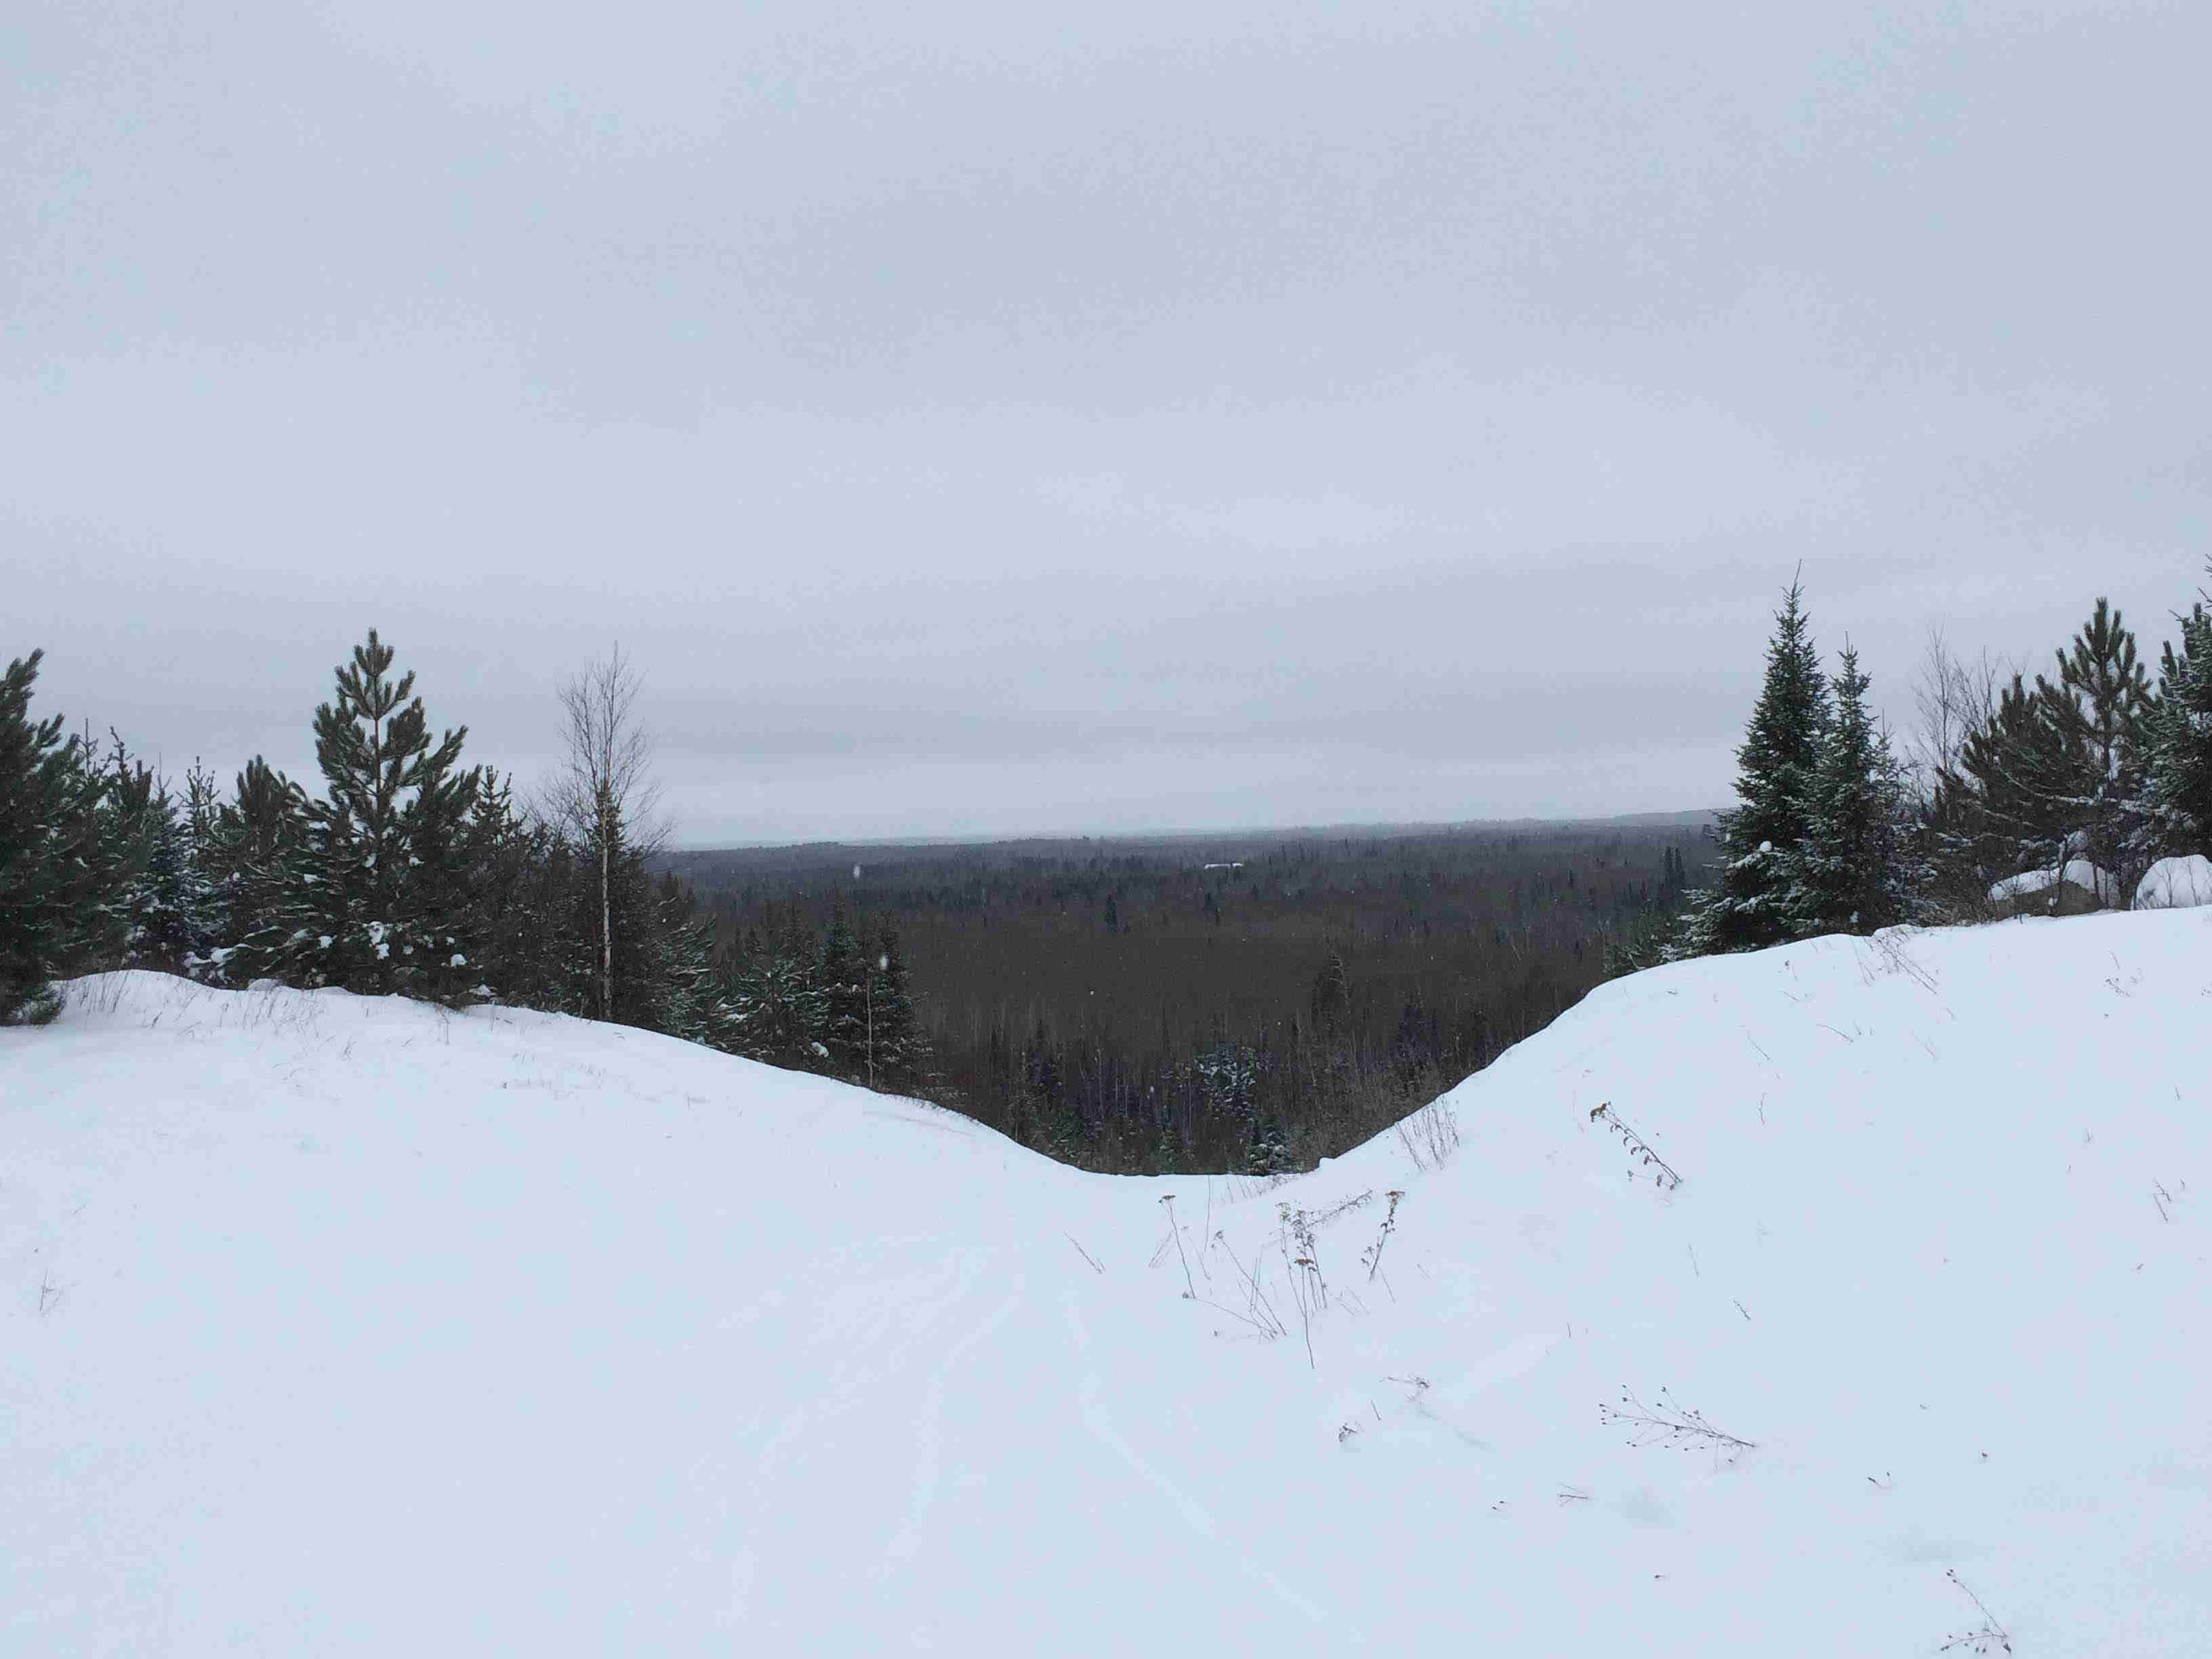 A view from the top of a snow covered hill overlooking a pine forest